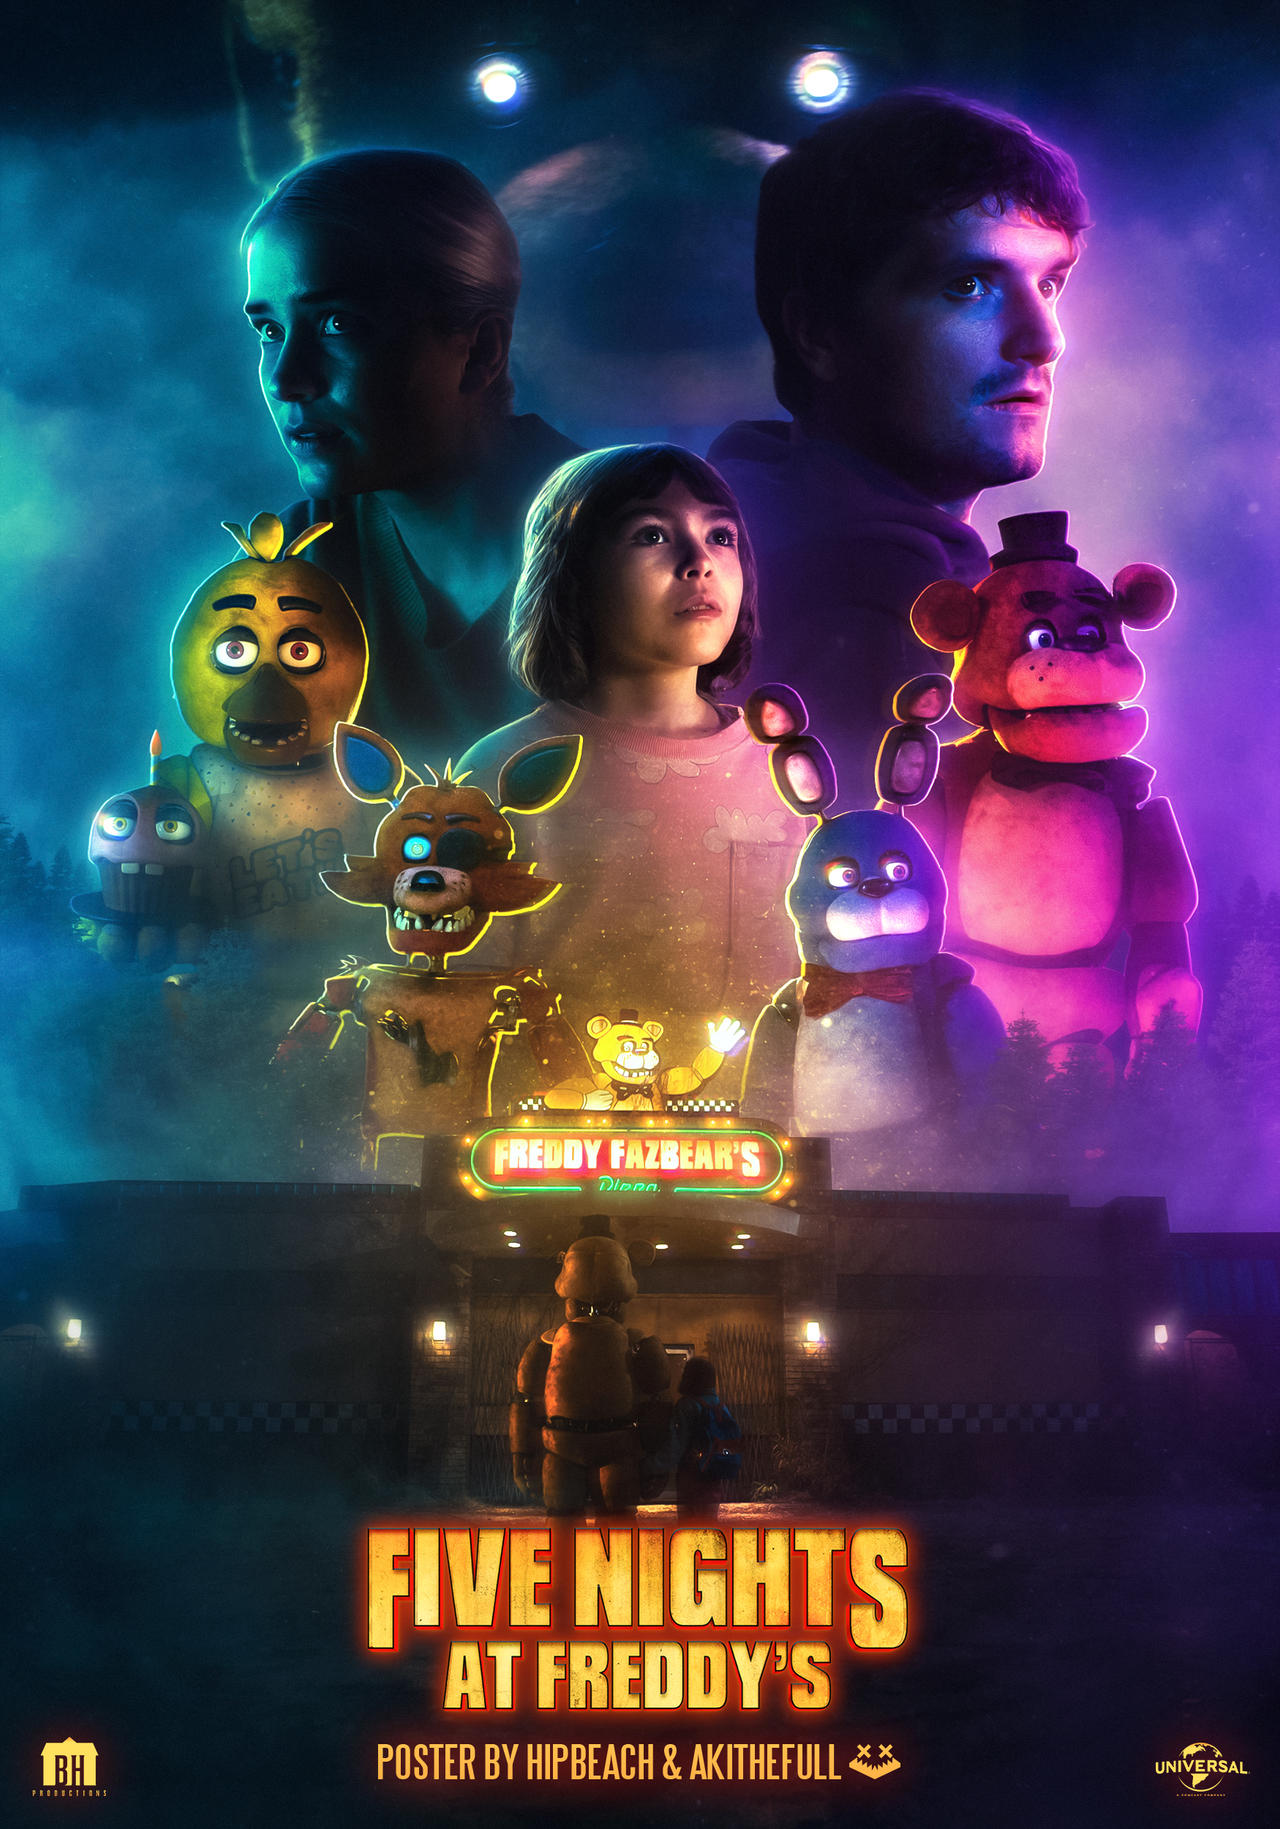 Five Nights at Freddy's' Film & Character Posters Photo Gallery